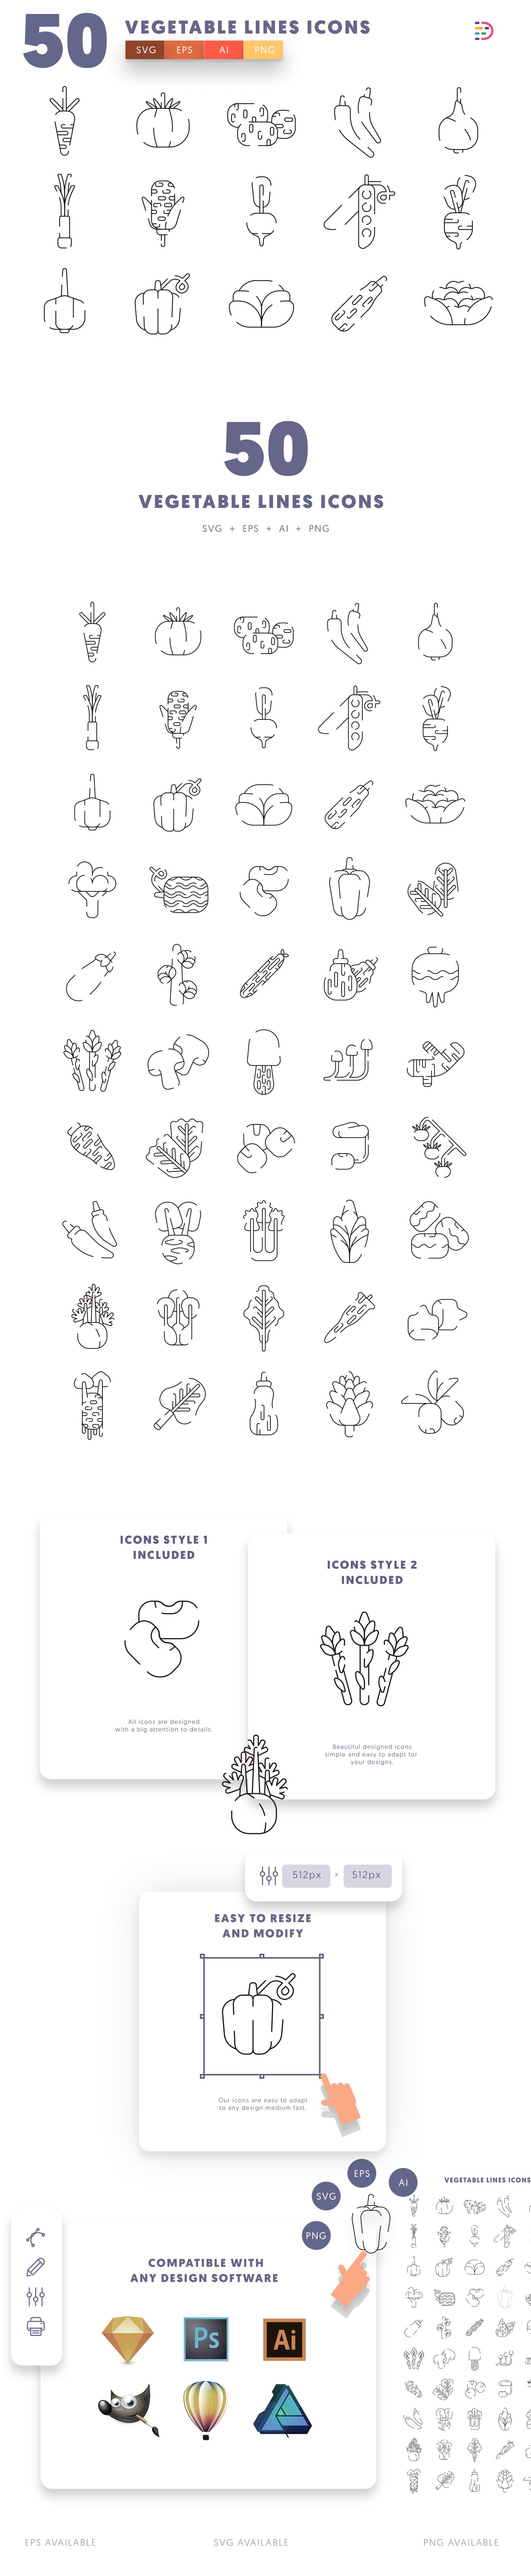 Editable vegetable lines icons icon pack, easy to edit and customize icons